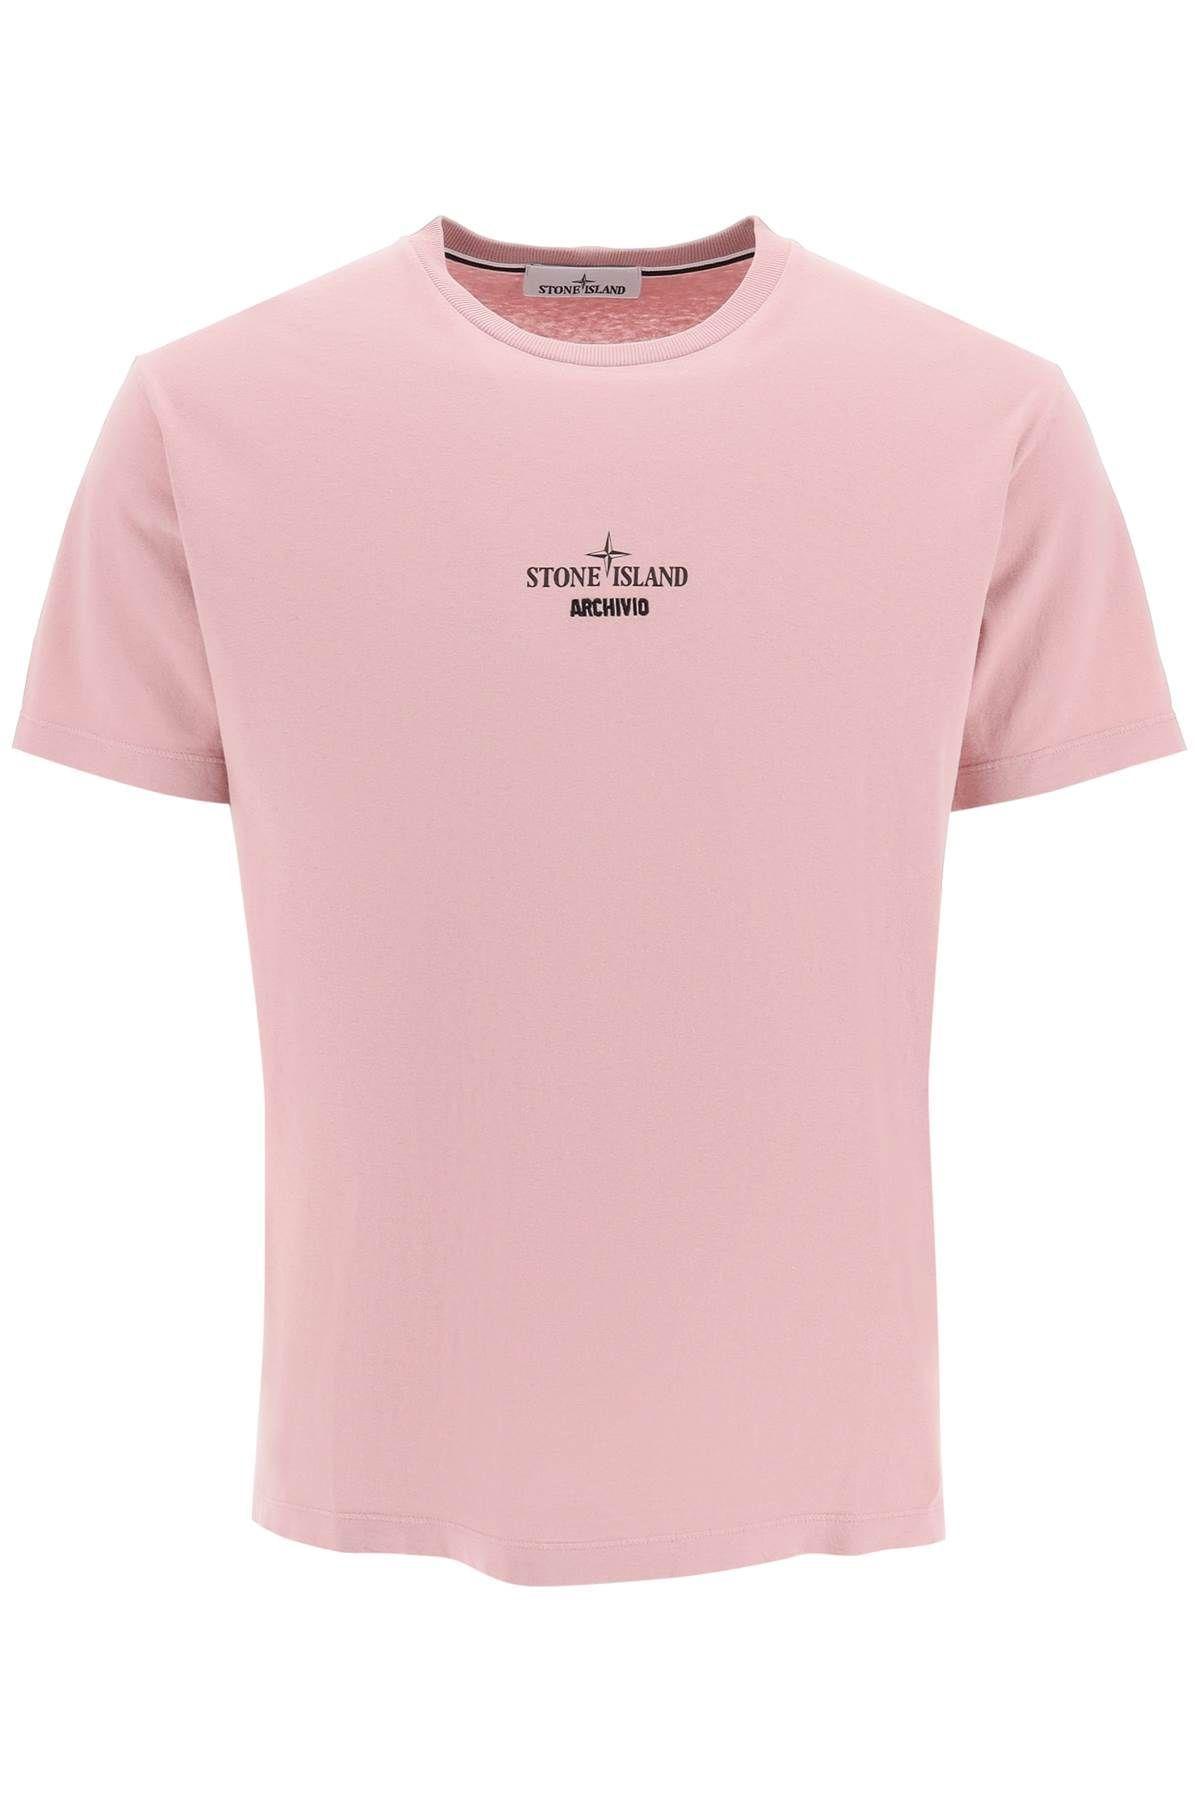 Stone Island 'ice Jacket Camouflage' Archivio T-shirt in Pink for Men | Lyst